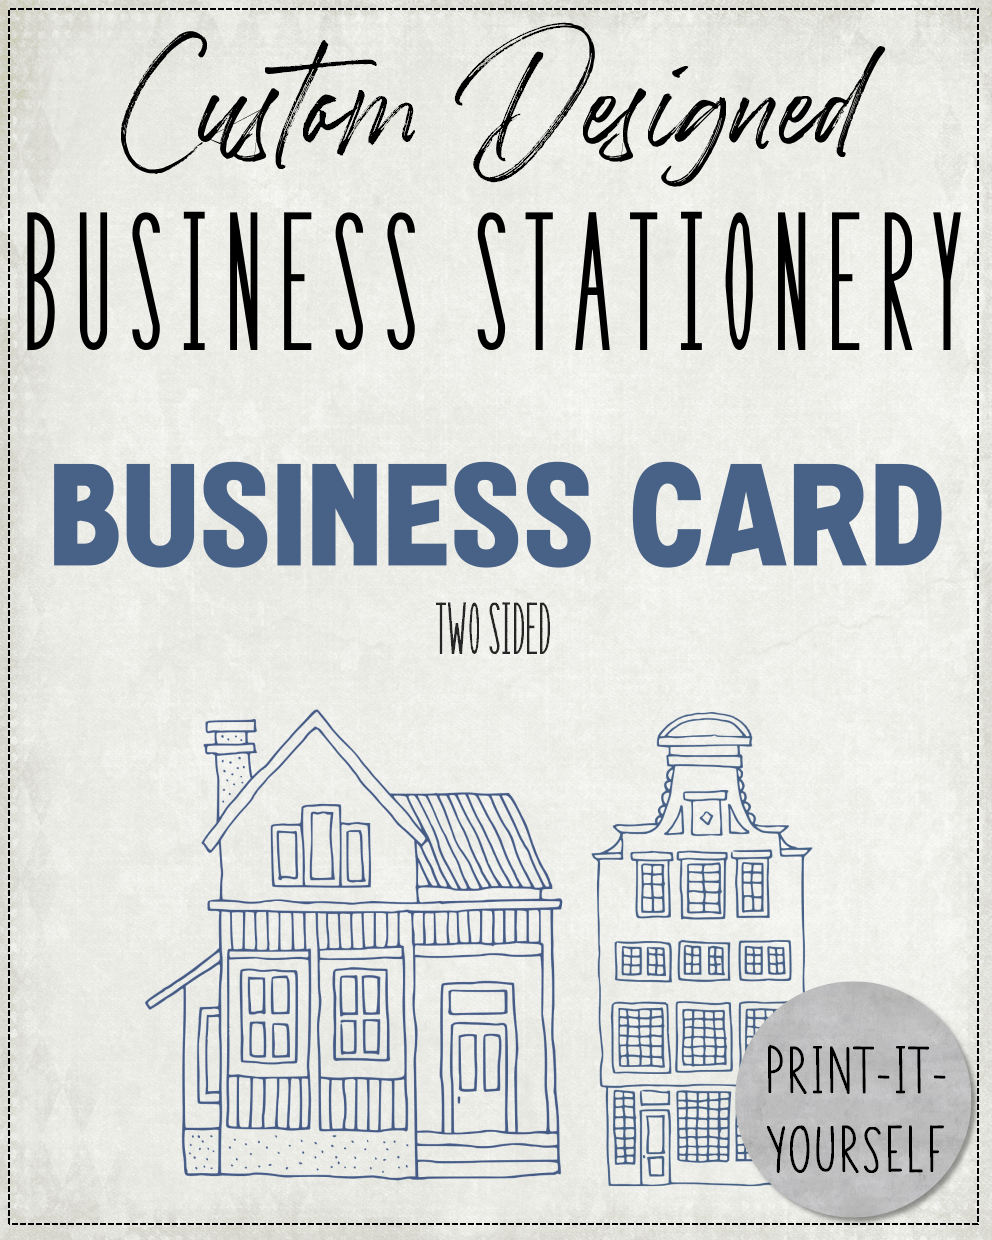 CUSTOM DESIGNED:  Business Stationery - Business Card (two-sided)